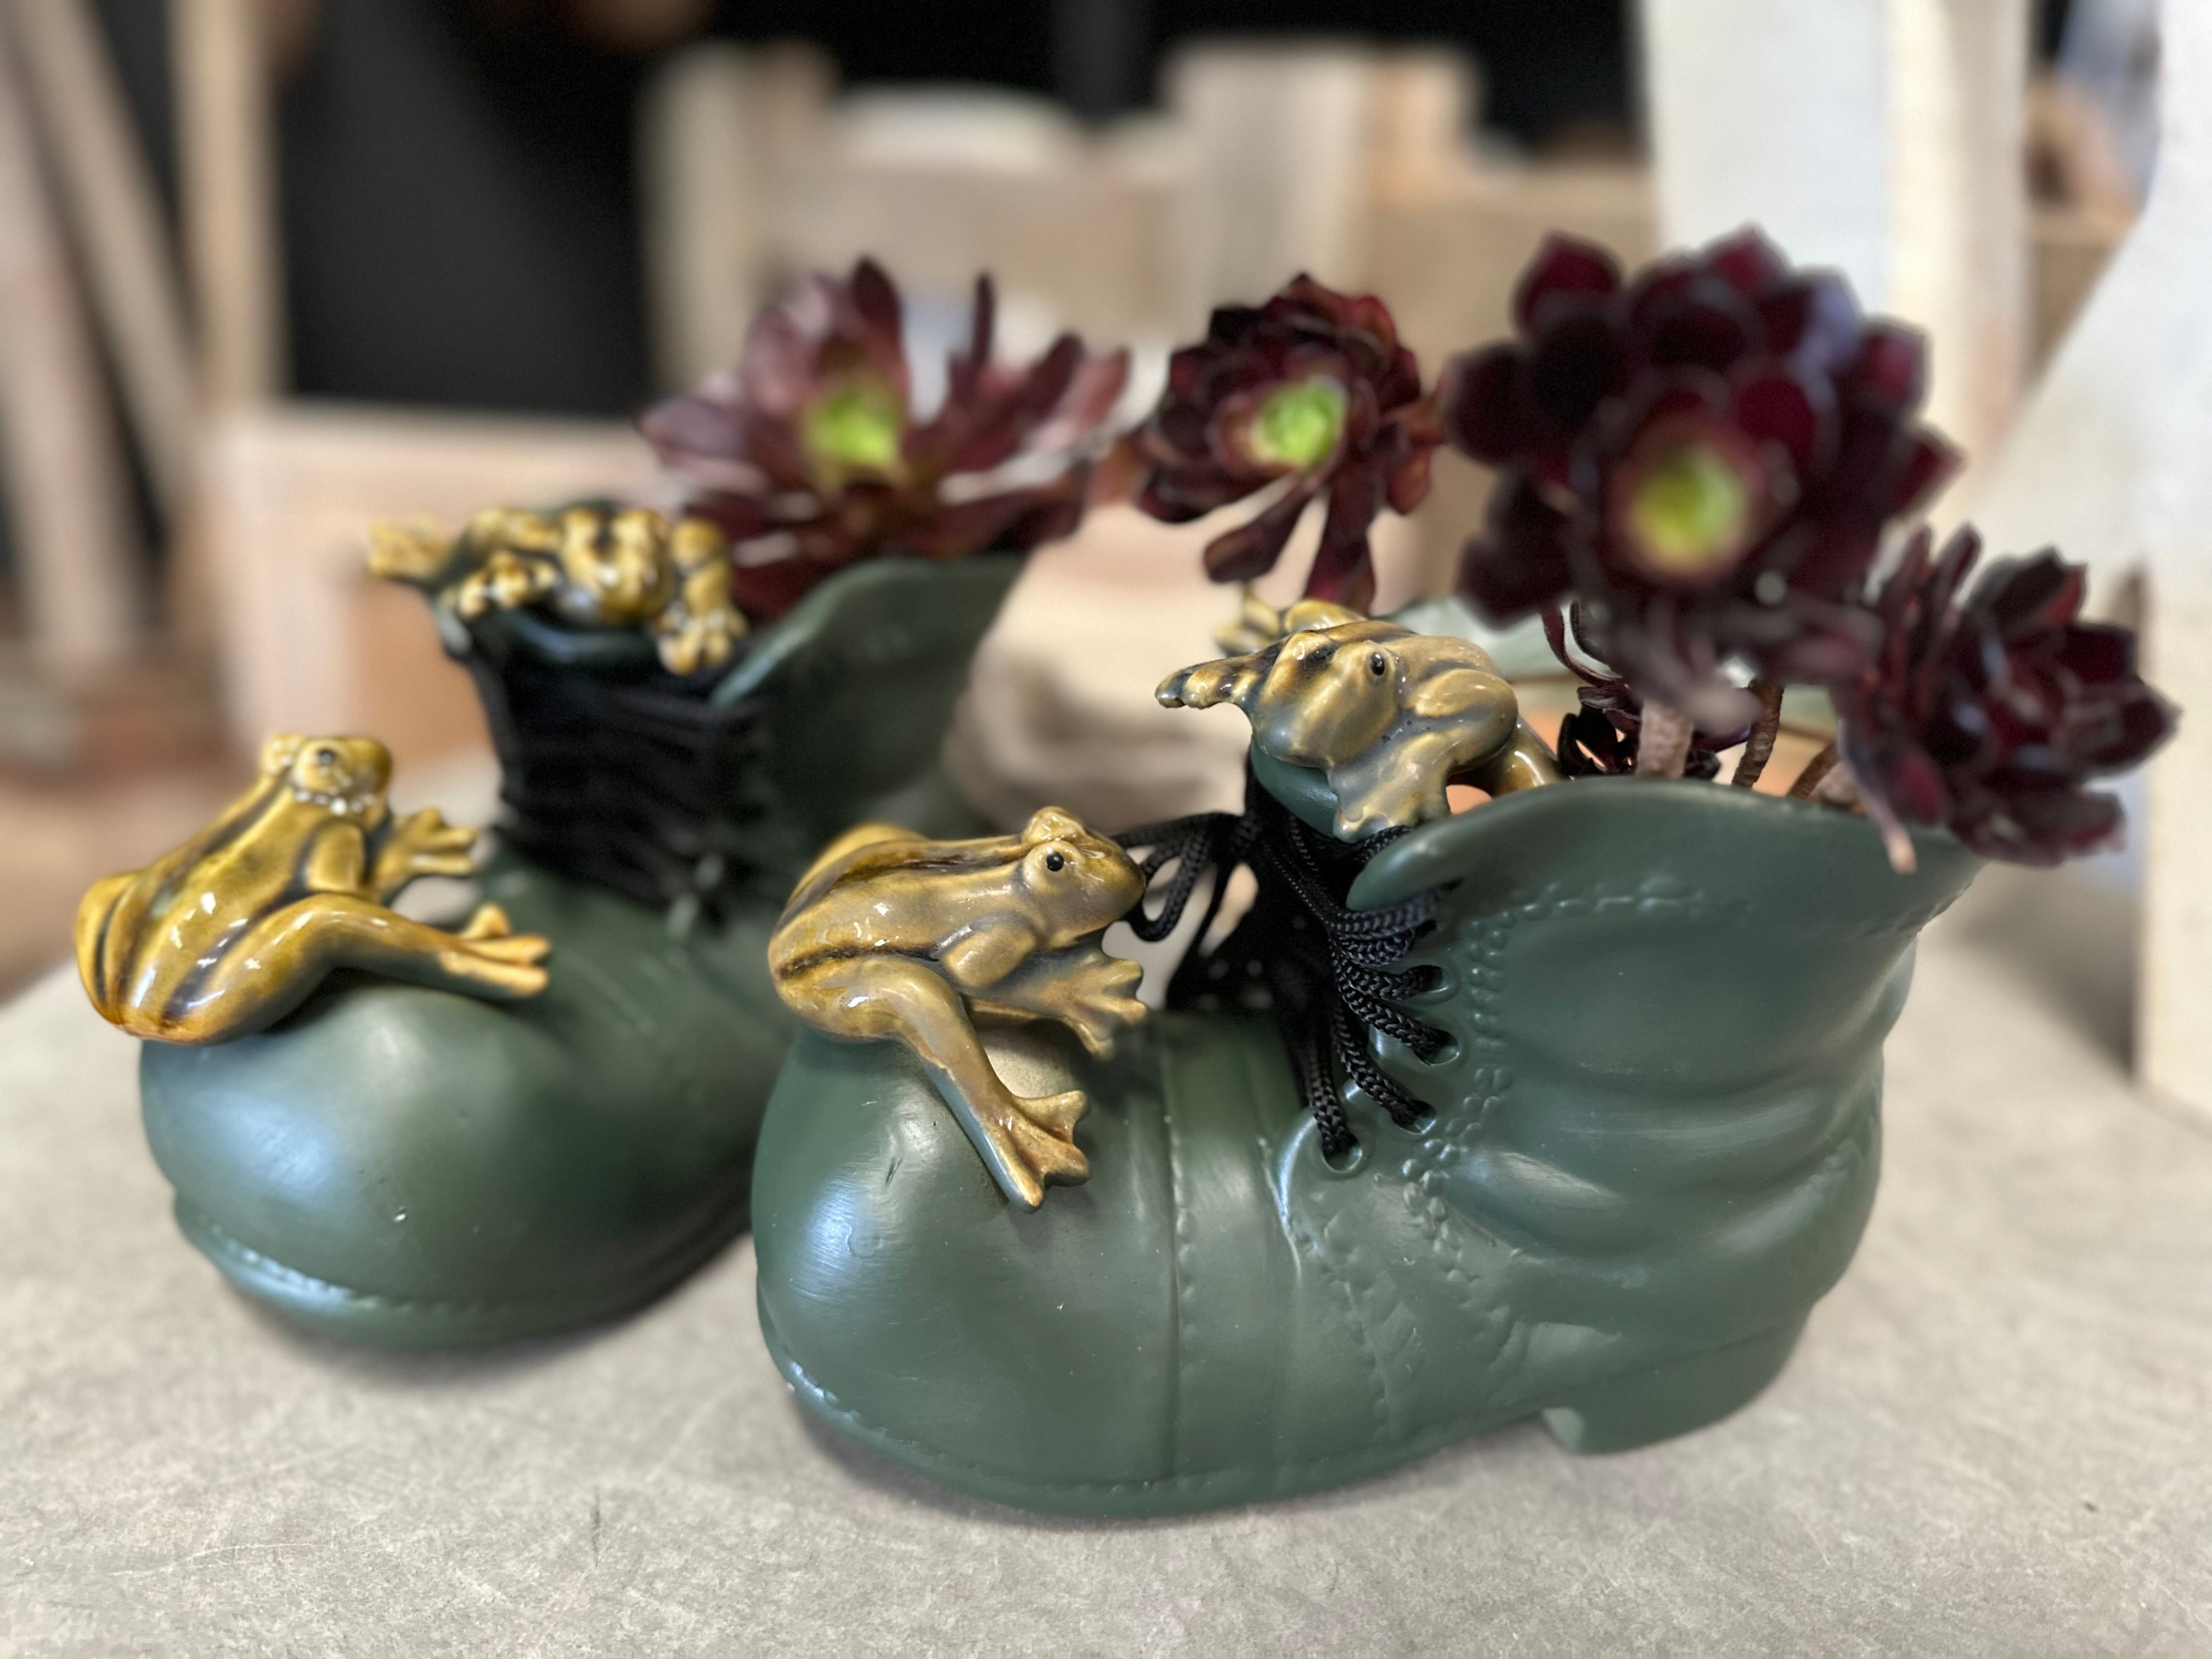 The FROG SHOE Planter